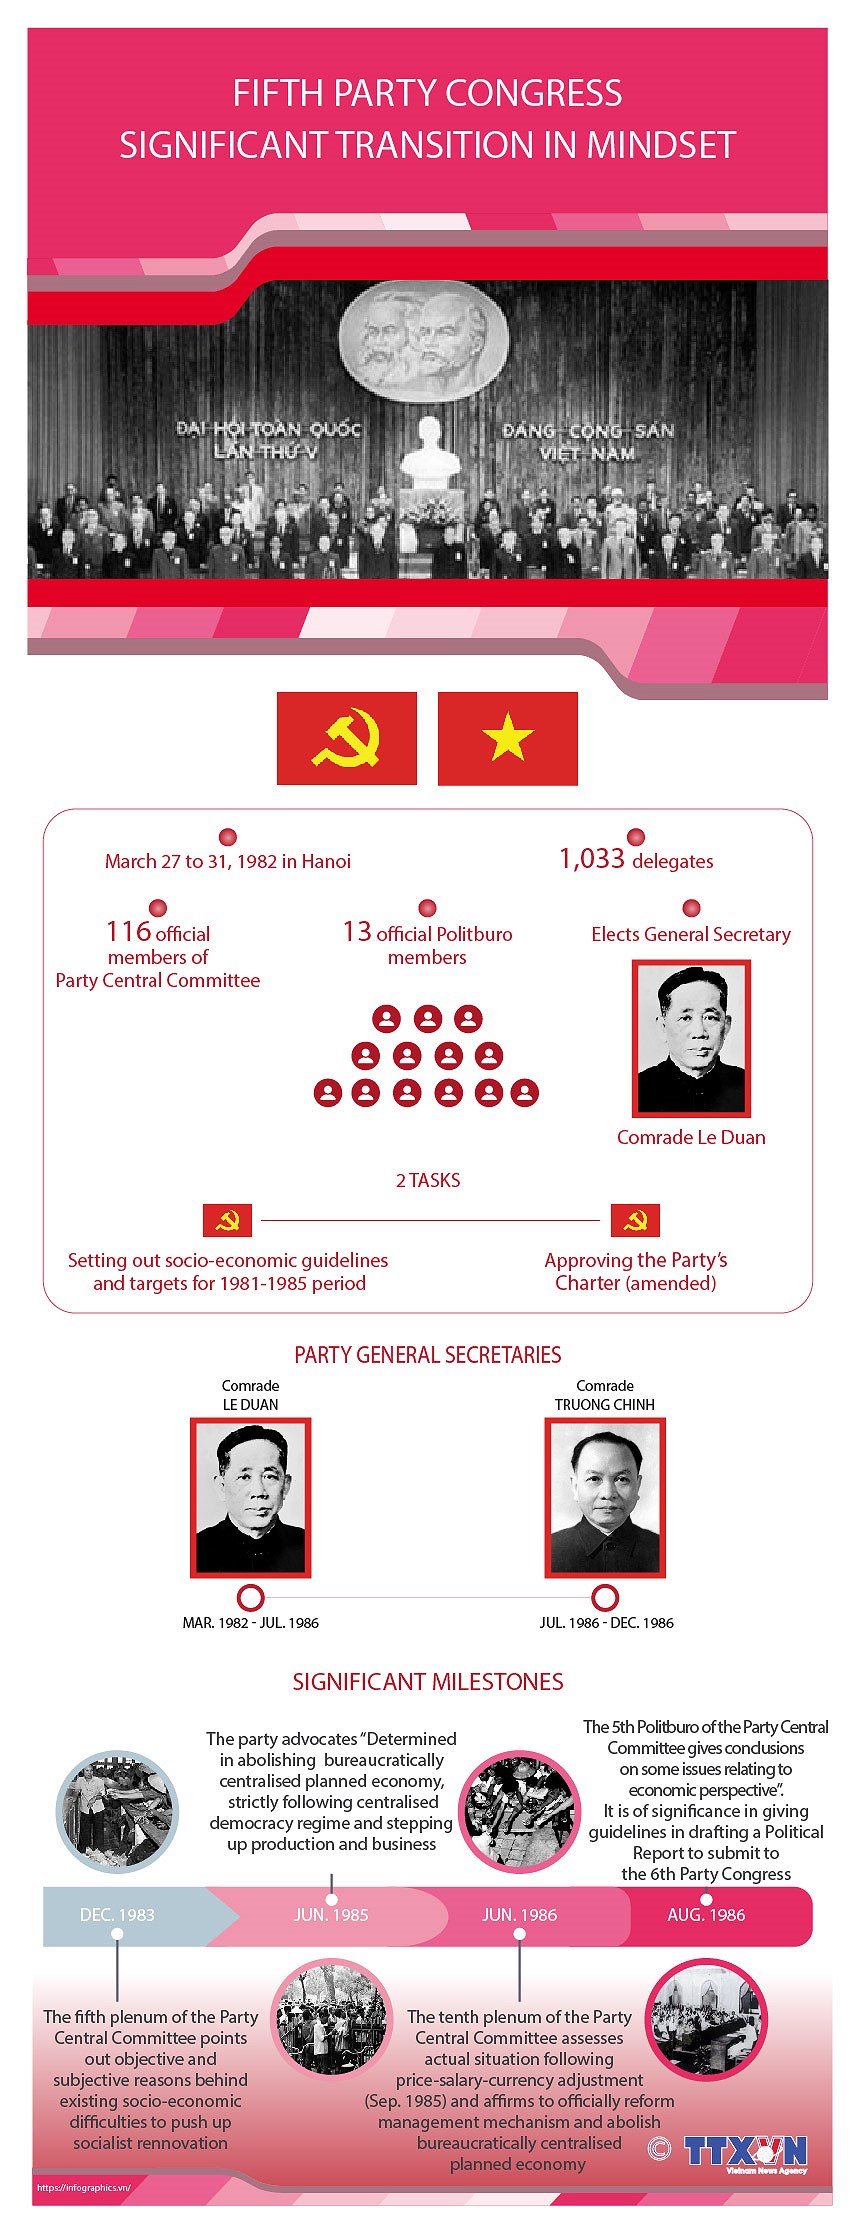 Fifth Party Congress: Significant transition in mindset hinh anh 1